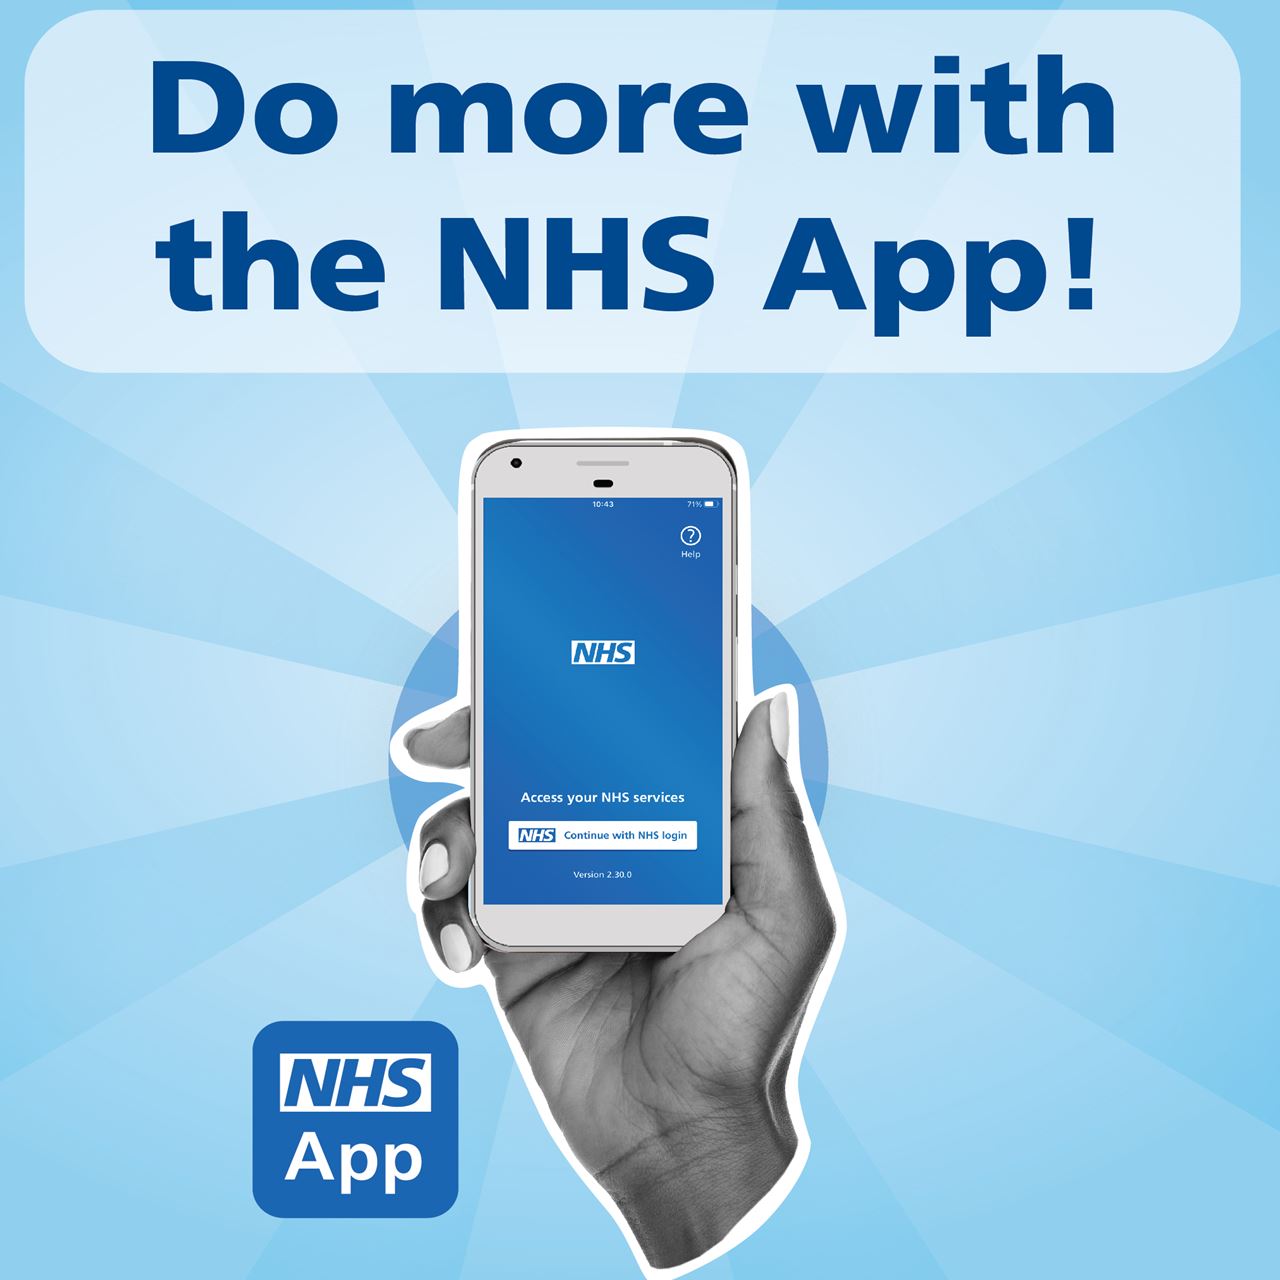 Do more with the NHS APP